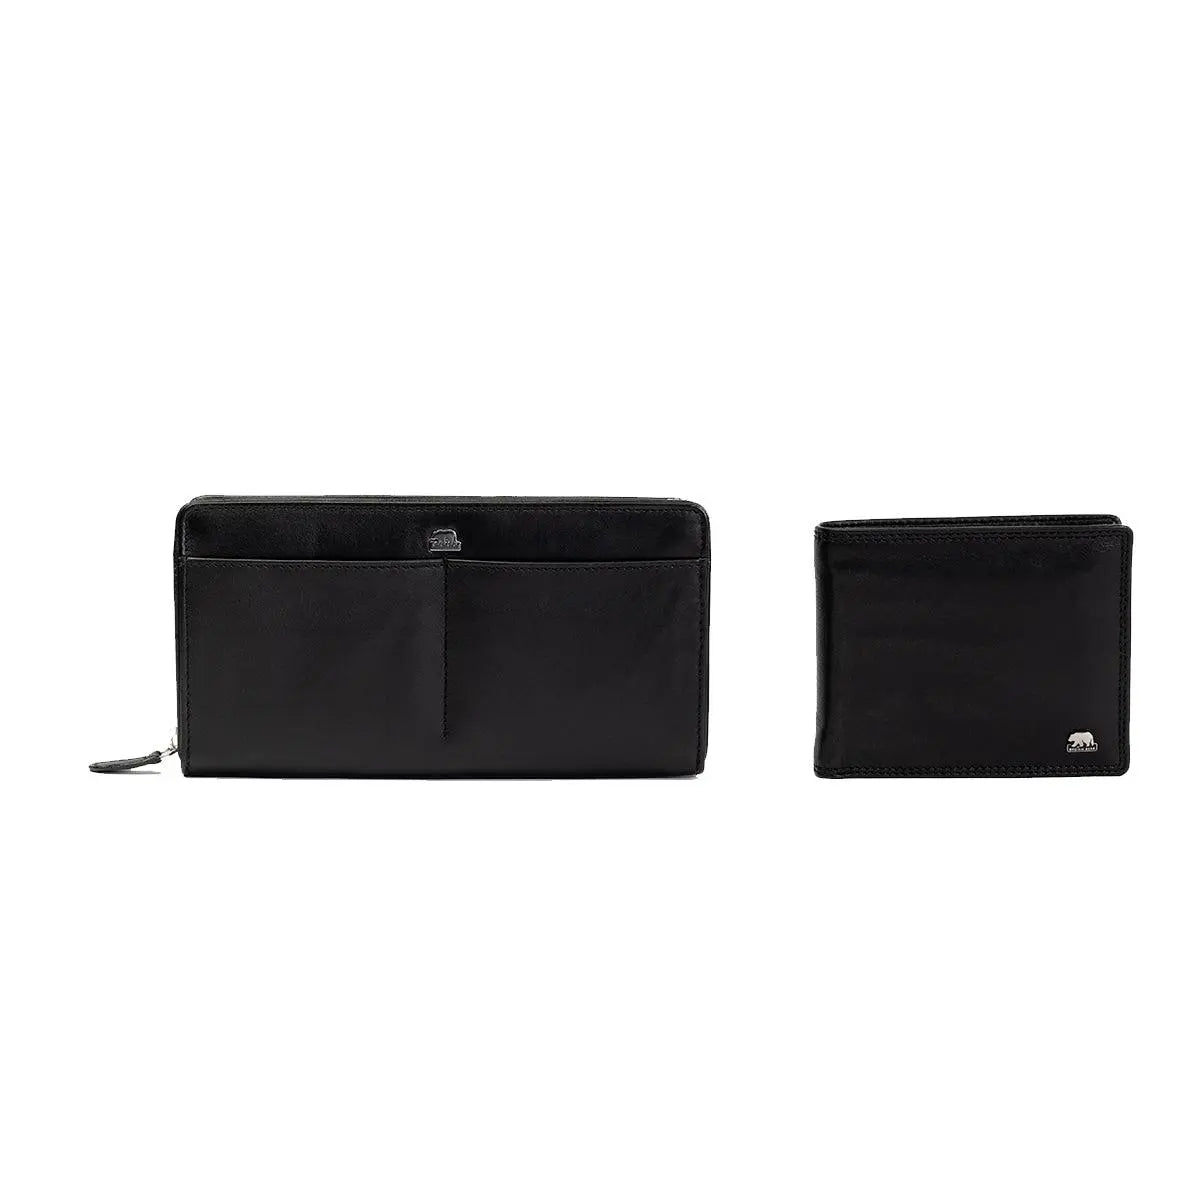 Gift Set - His & Hers Wallet Duo: A Perfect Pair for Stylish Couples - Brown Bear